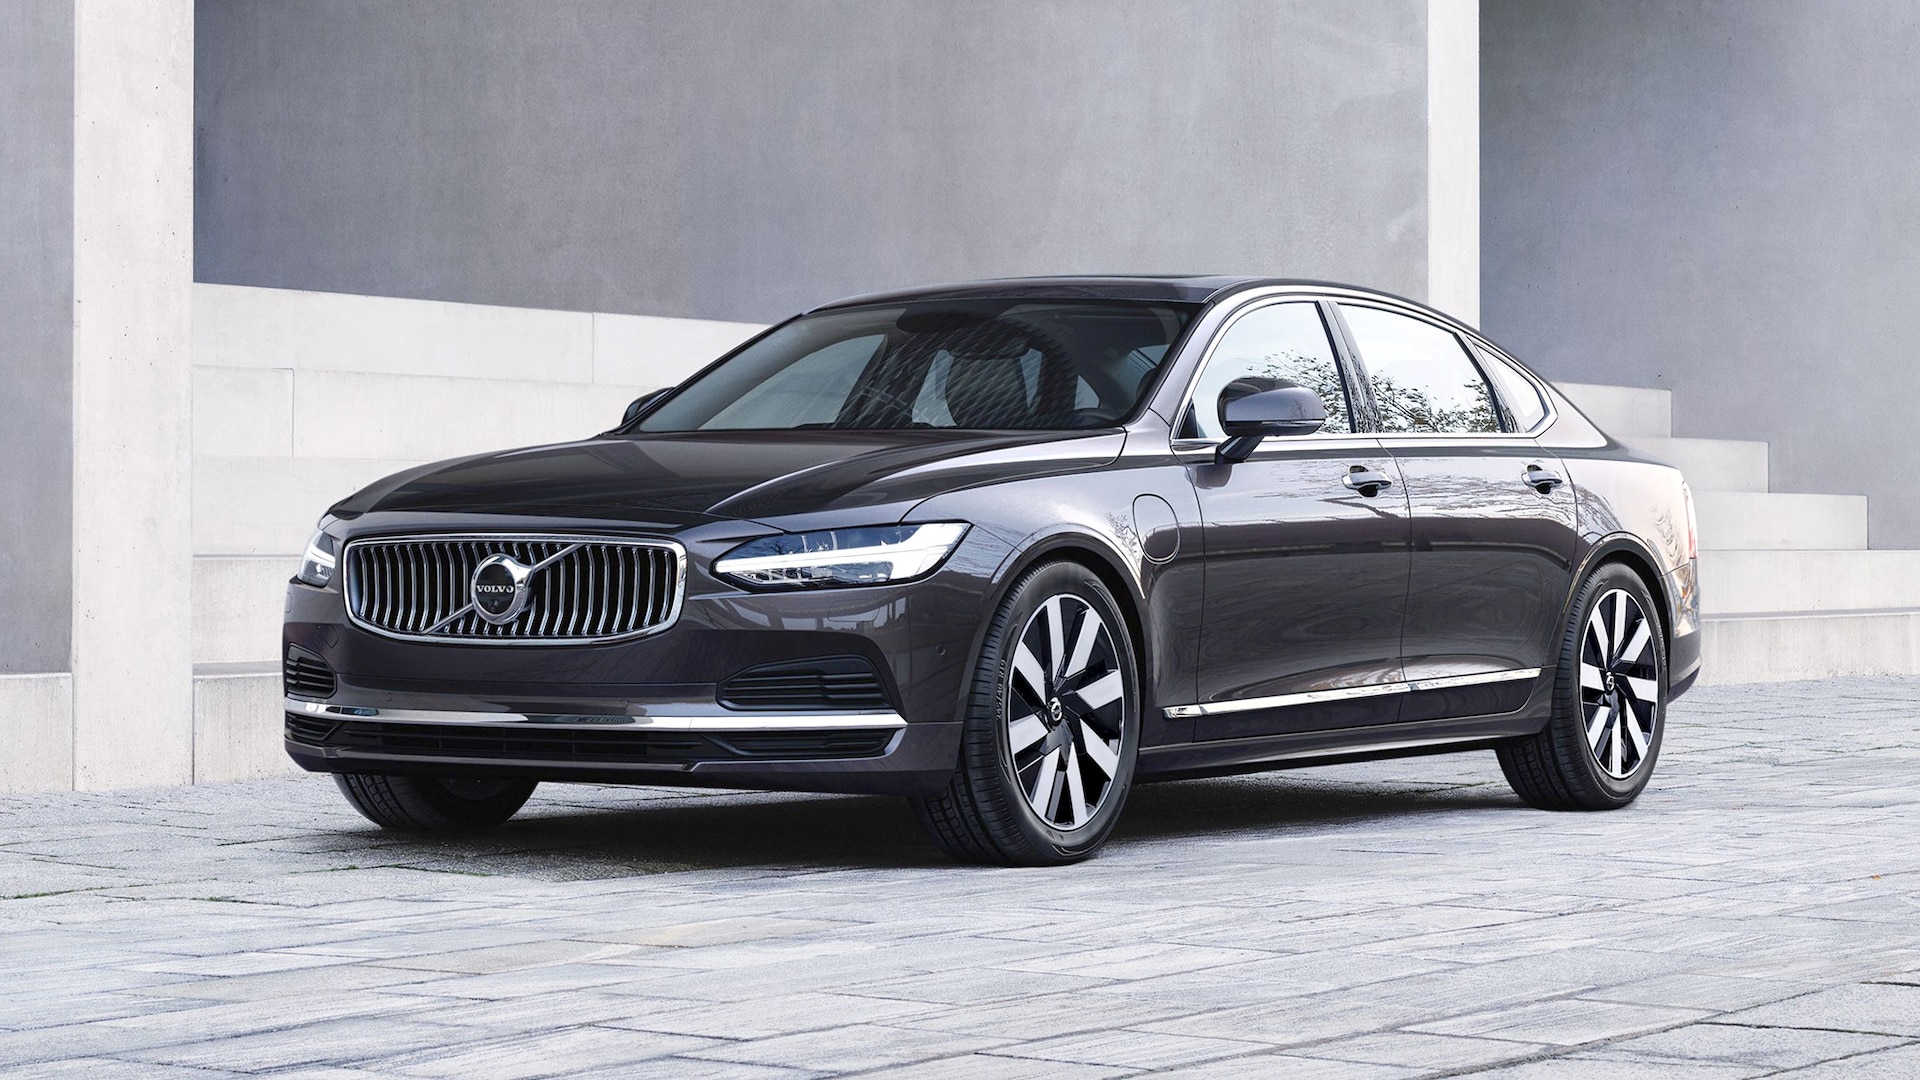 2023 Volvo S90 Prices, Reviews, and Photos - MotorTrend